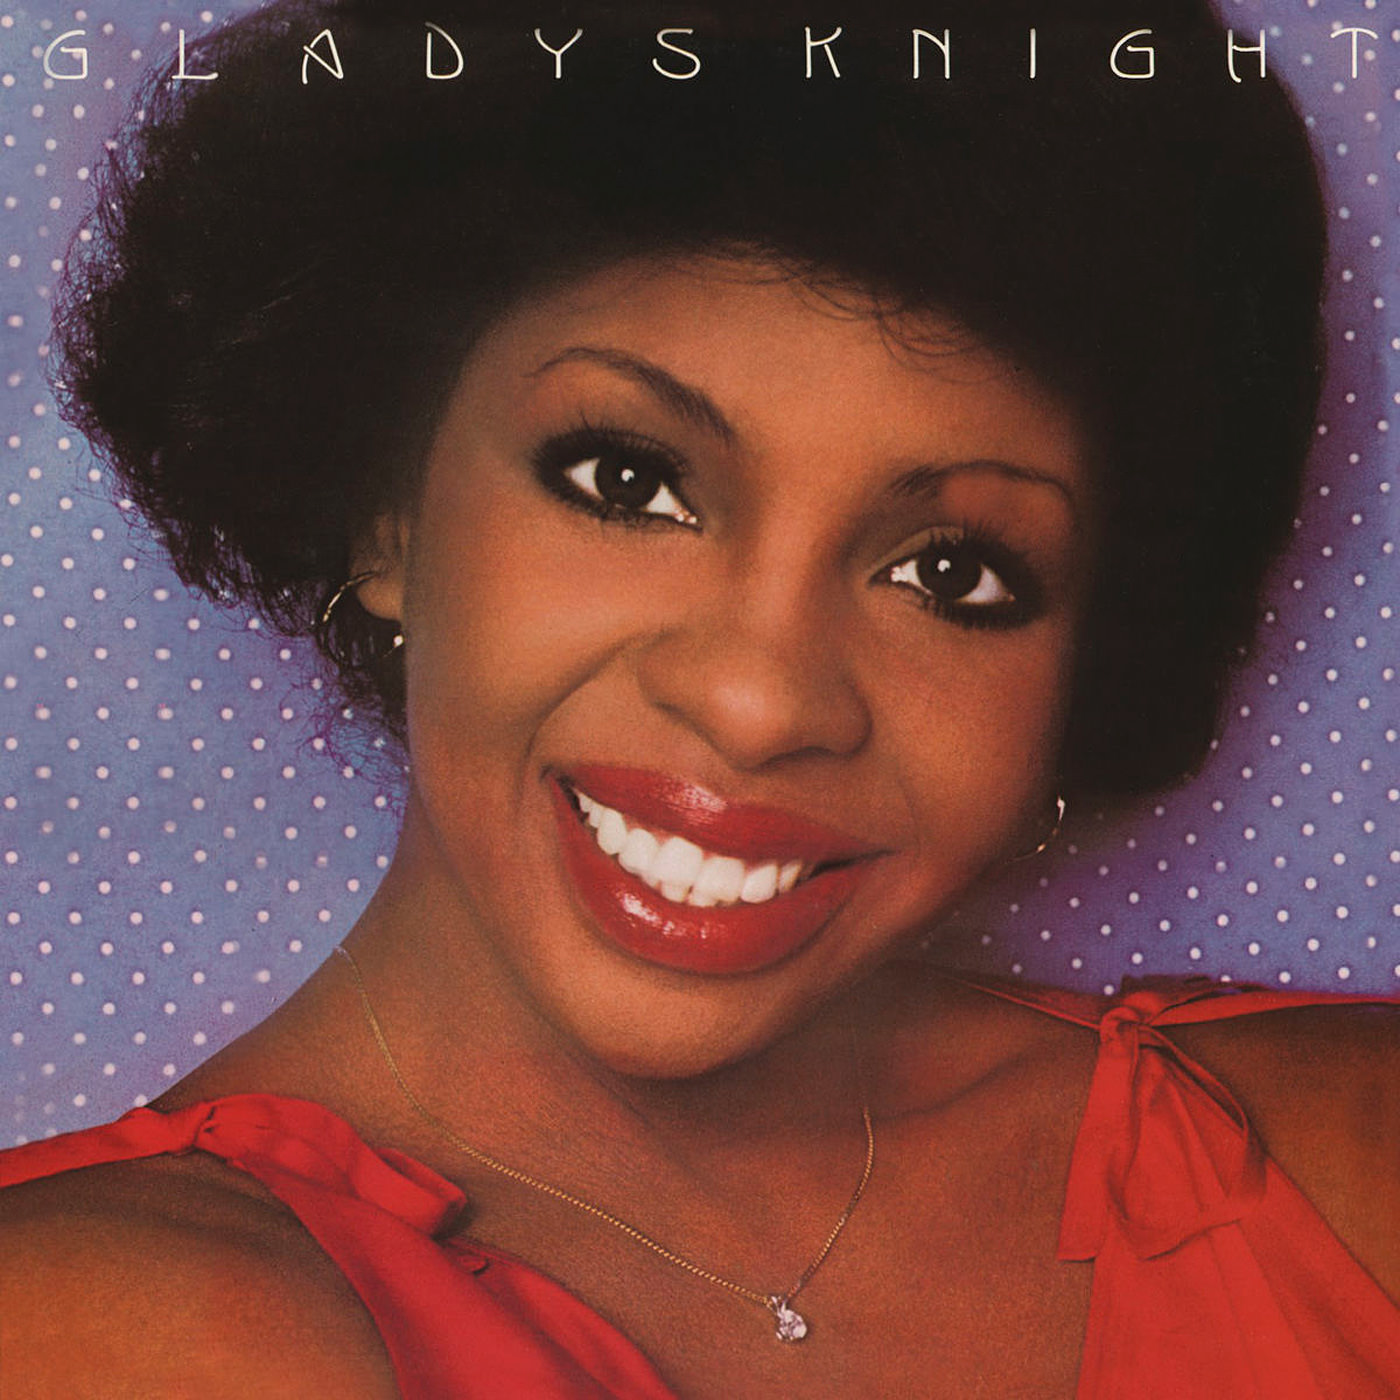 Gladys Knight – Gladys Knight (Expanded Edition) (1979/2013) [Official Digital Download 24bit/96kHz]